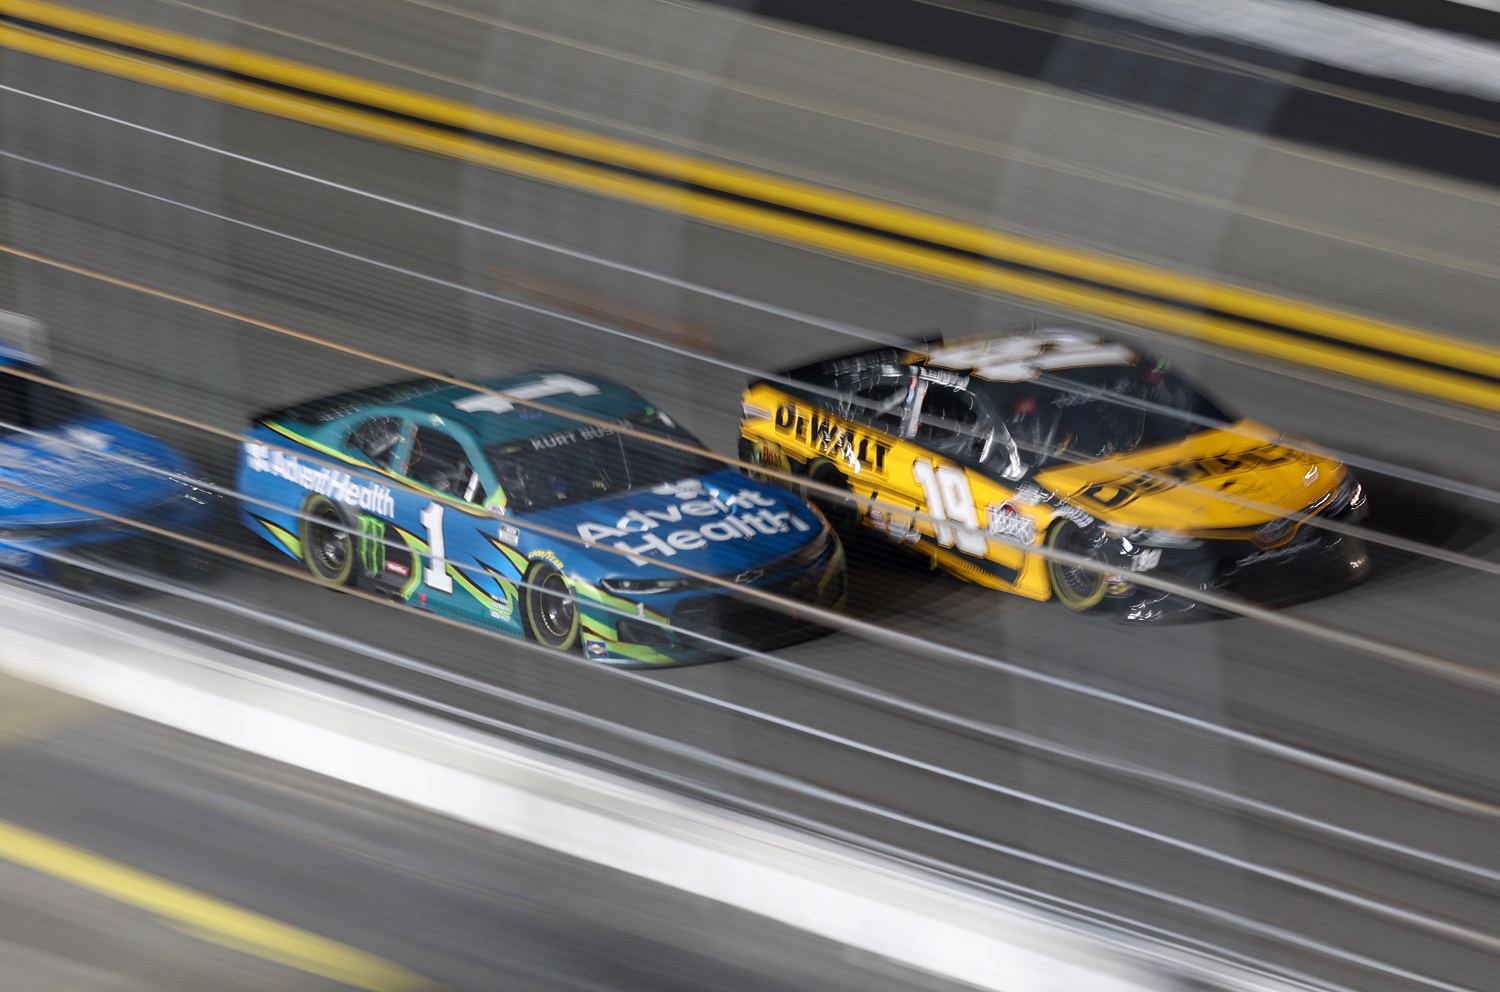 Martin Truex Jr. , driver of the No. 19 Toyota, and Kurt Busch, driver of the No. 1 Chevrolet, race side-by-side during the Busch Clash on Feb. 9, 2021, at Daytona International Speedway. | David Rosenblum/Icon Sportswire via Getty Images